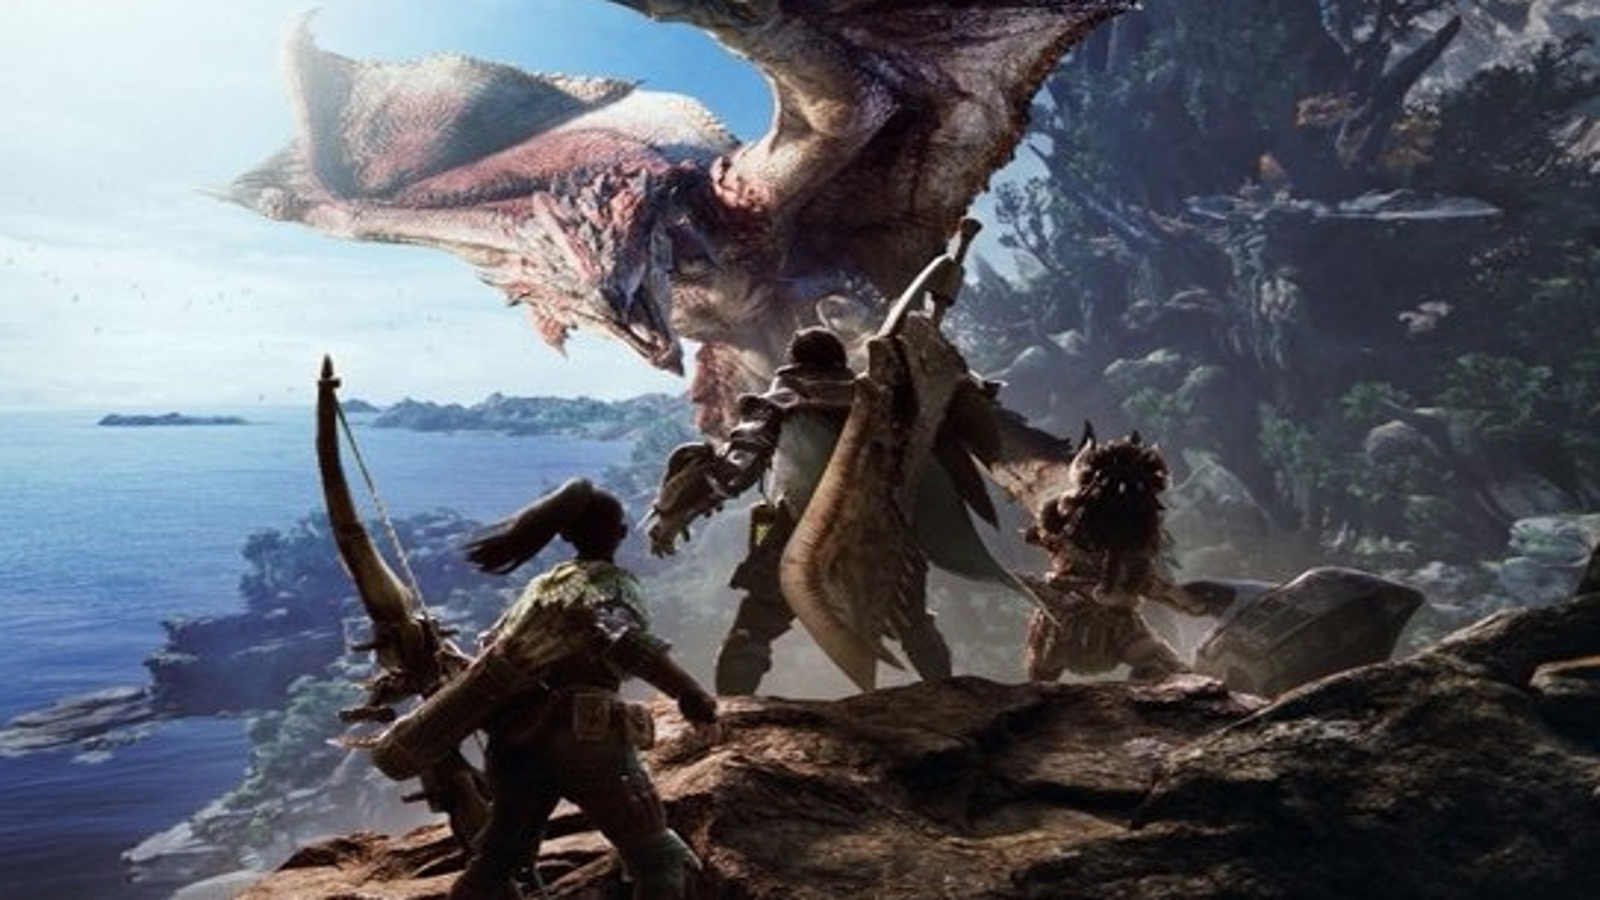 Best Action RPGs To Play If You Like Monster Hunter: World